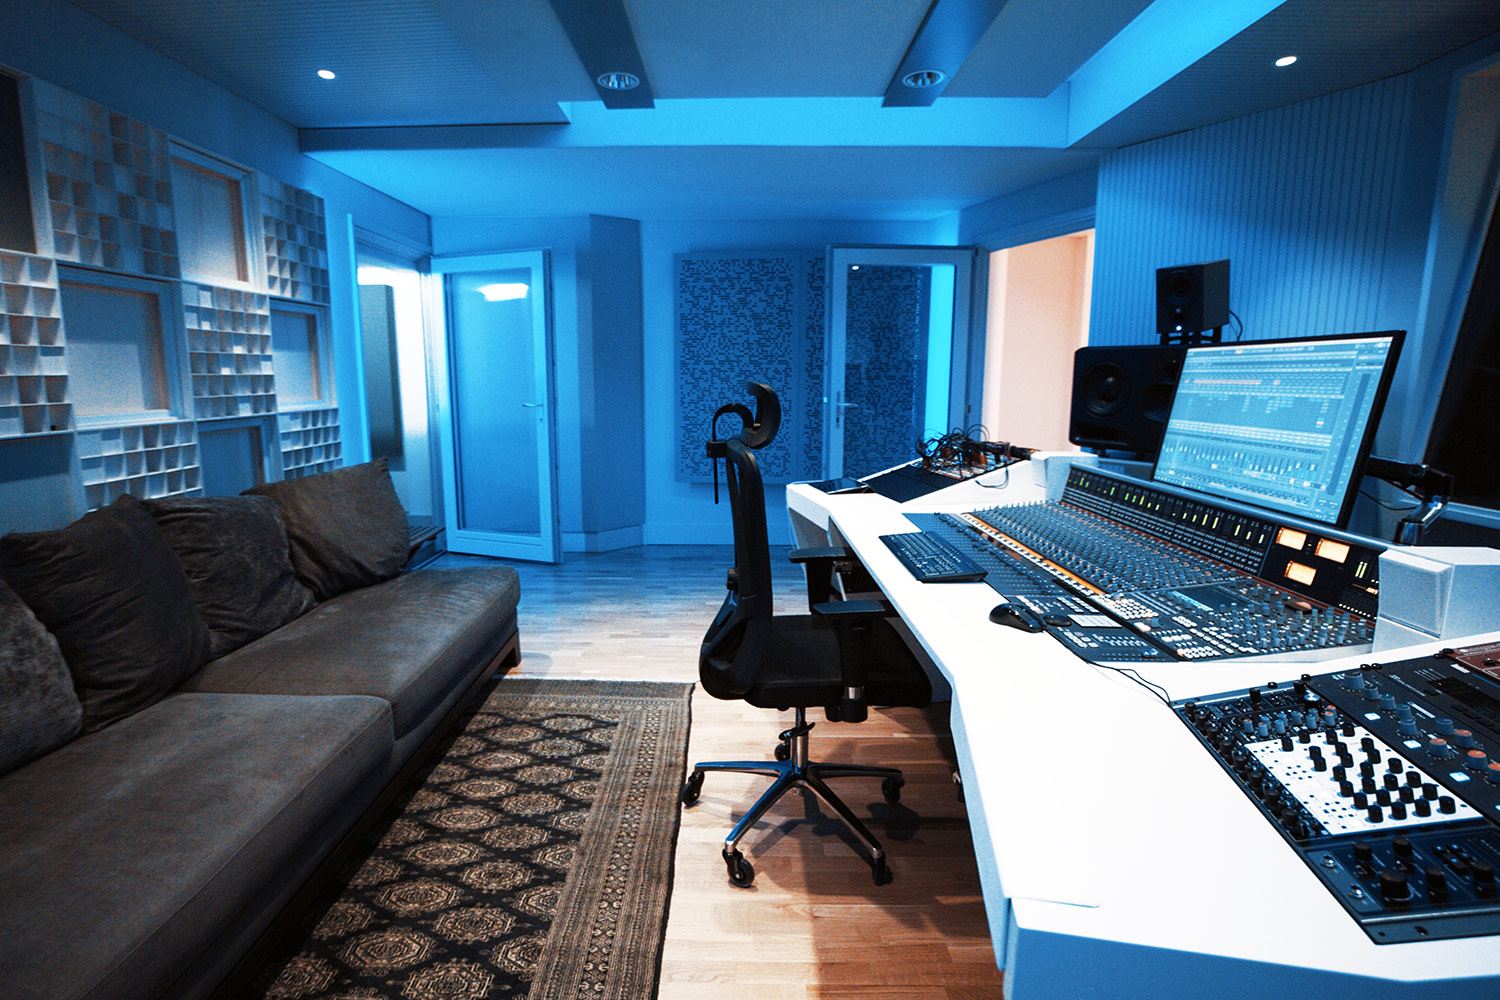 Vienna City Sound is a twelve-room recording studio built in the basement of a vintage commercial building in the heart of Vienna. Owner Peter Zimmerl’s retained the services of WSDG to design his dream studio. Control room side photo.